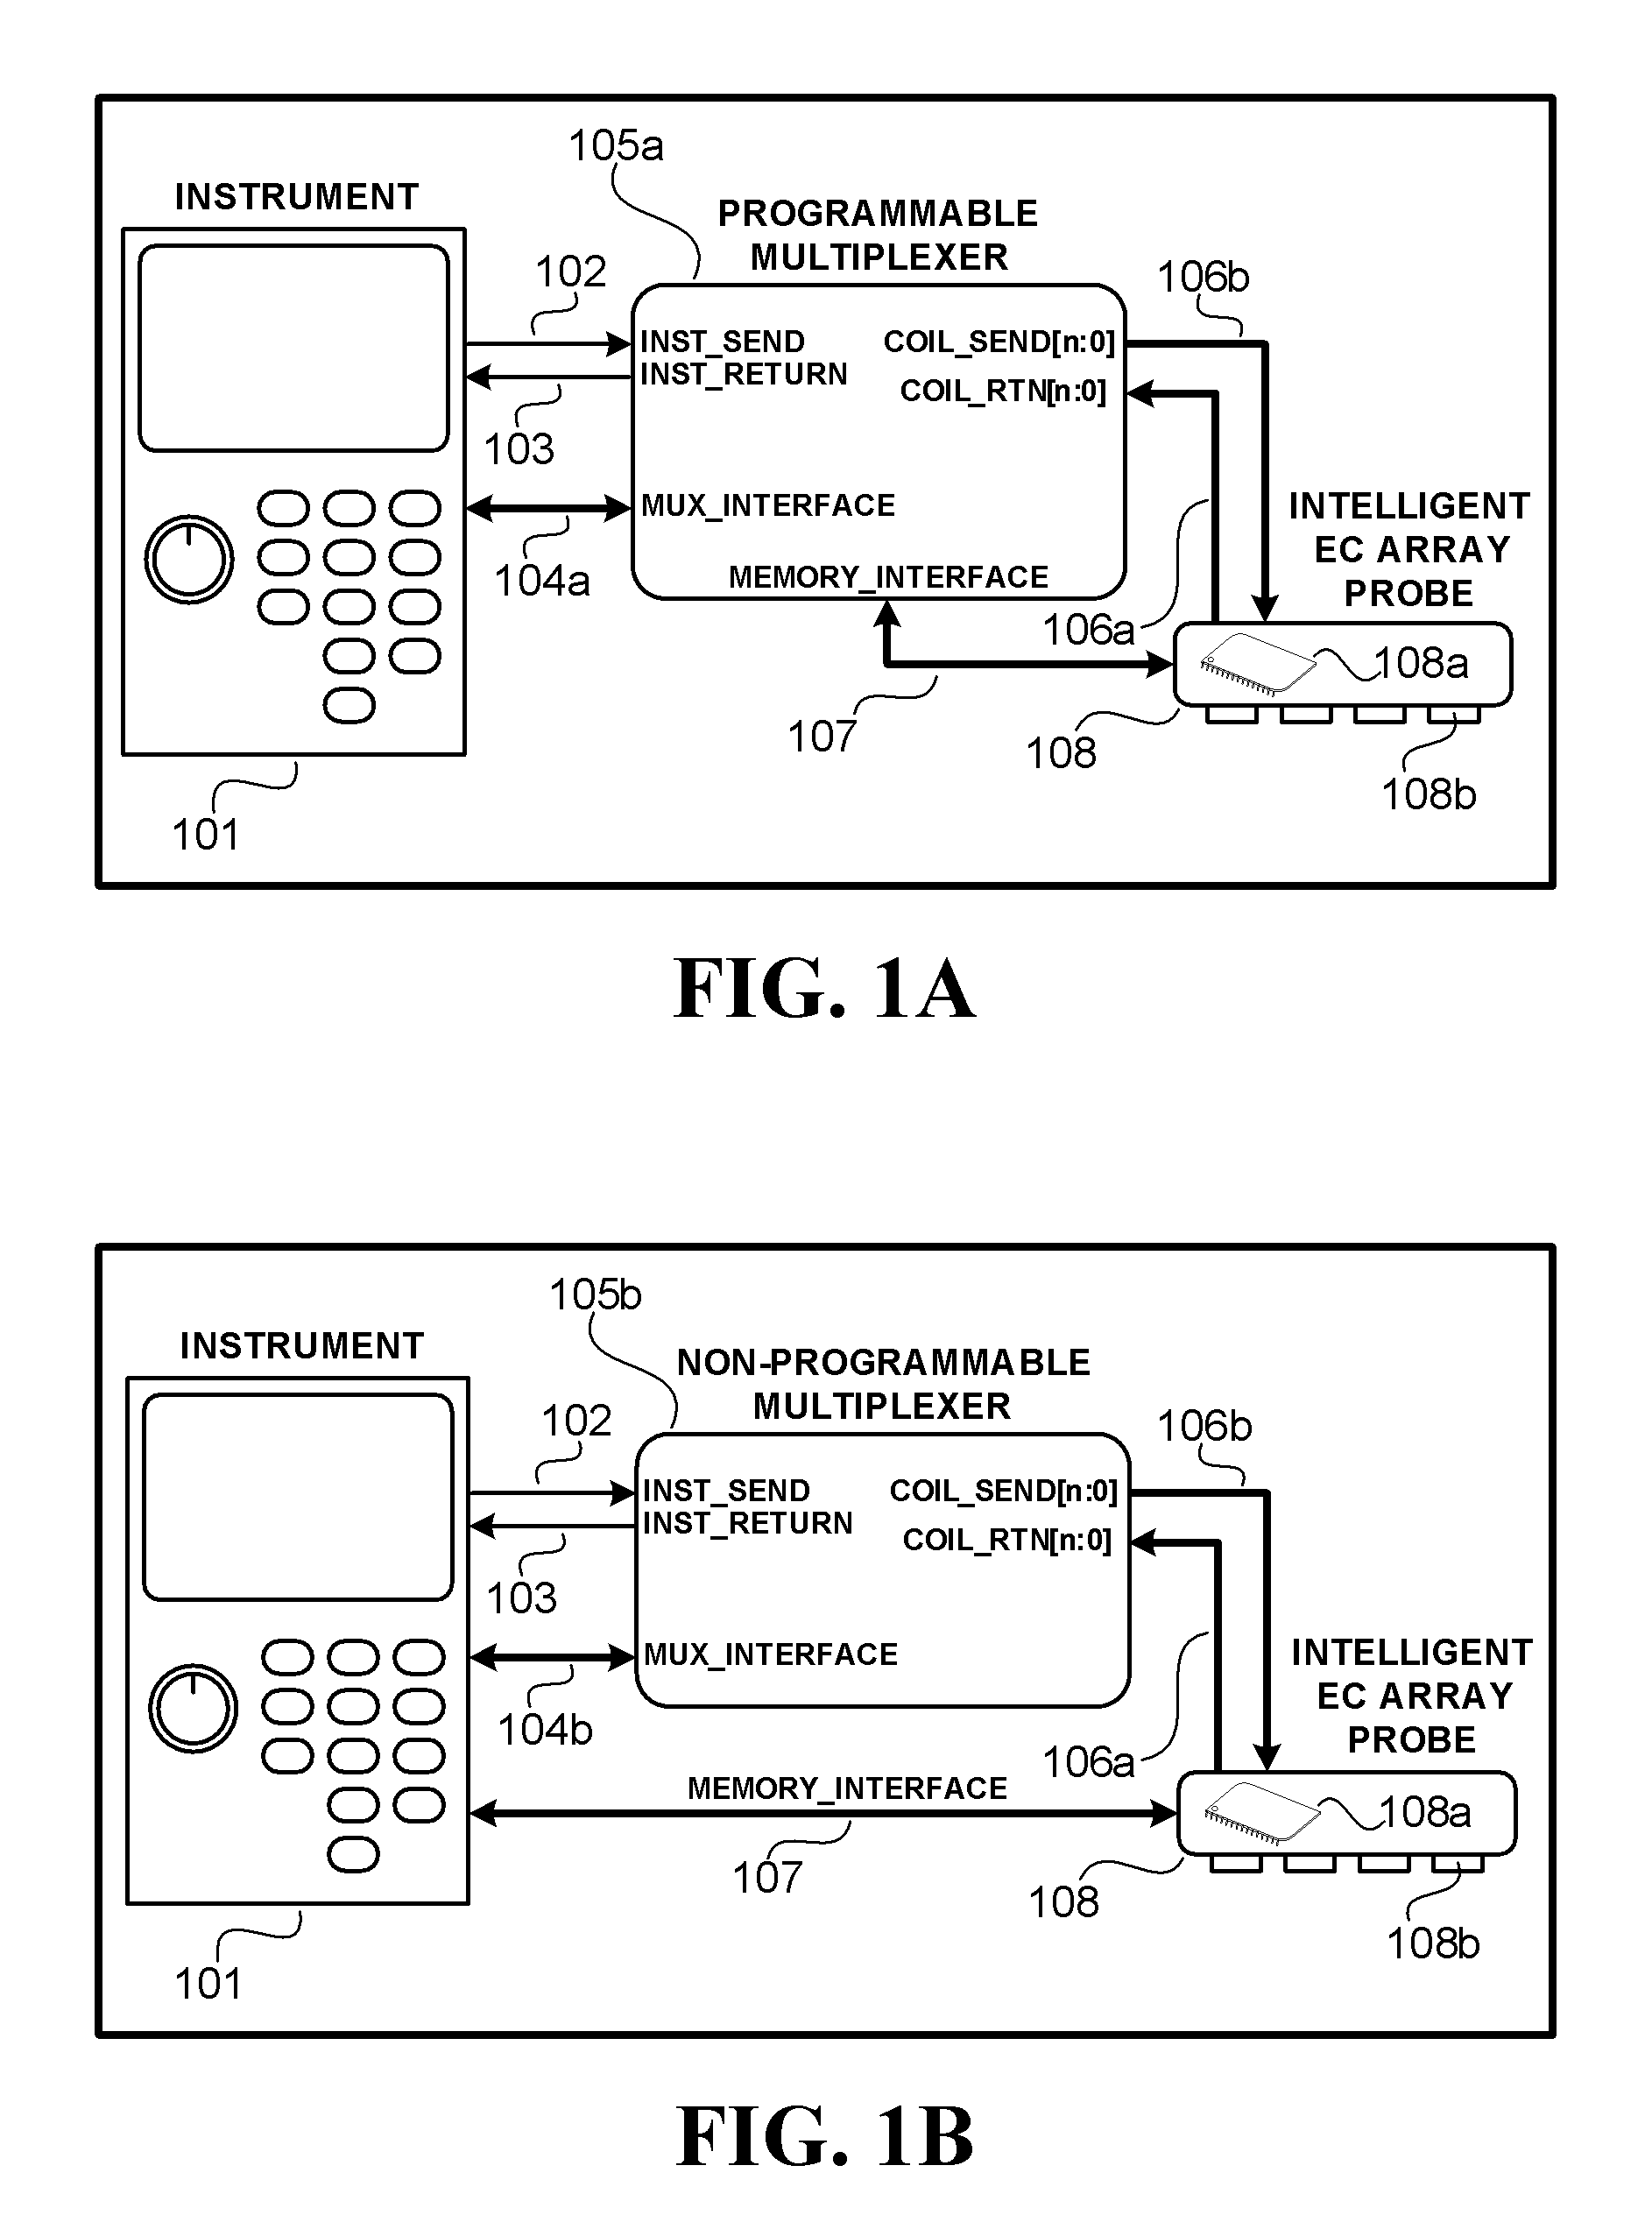 Intelligent eddy current array probe with embedded firing sequence memory